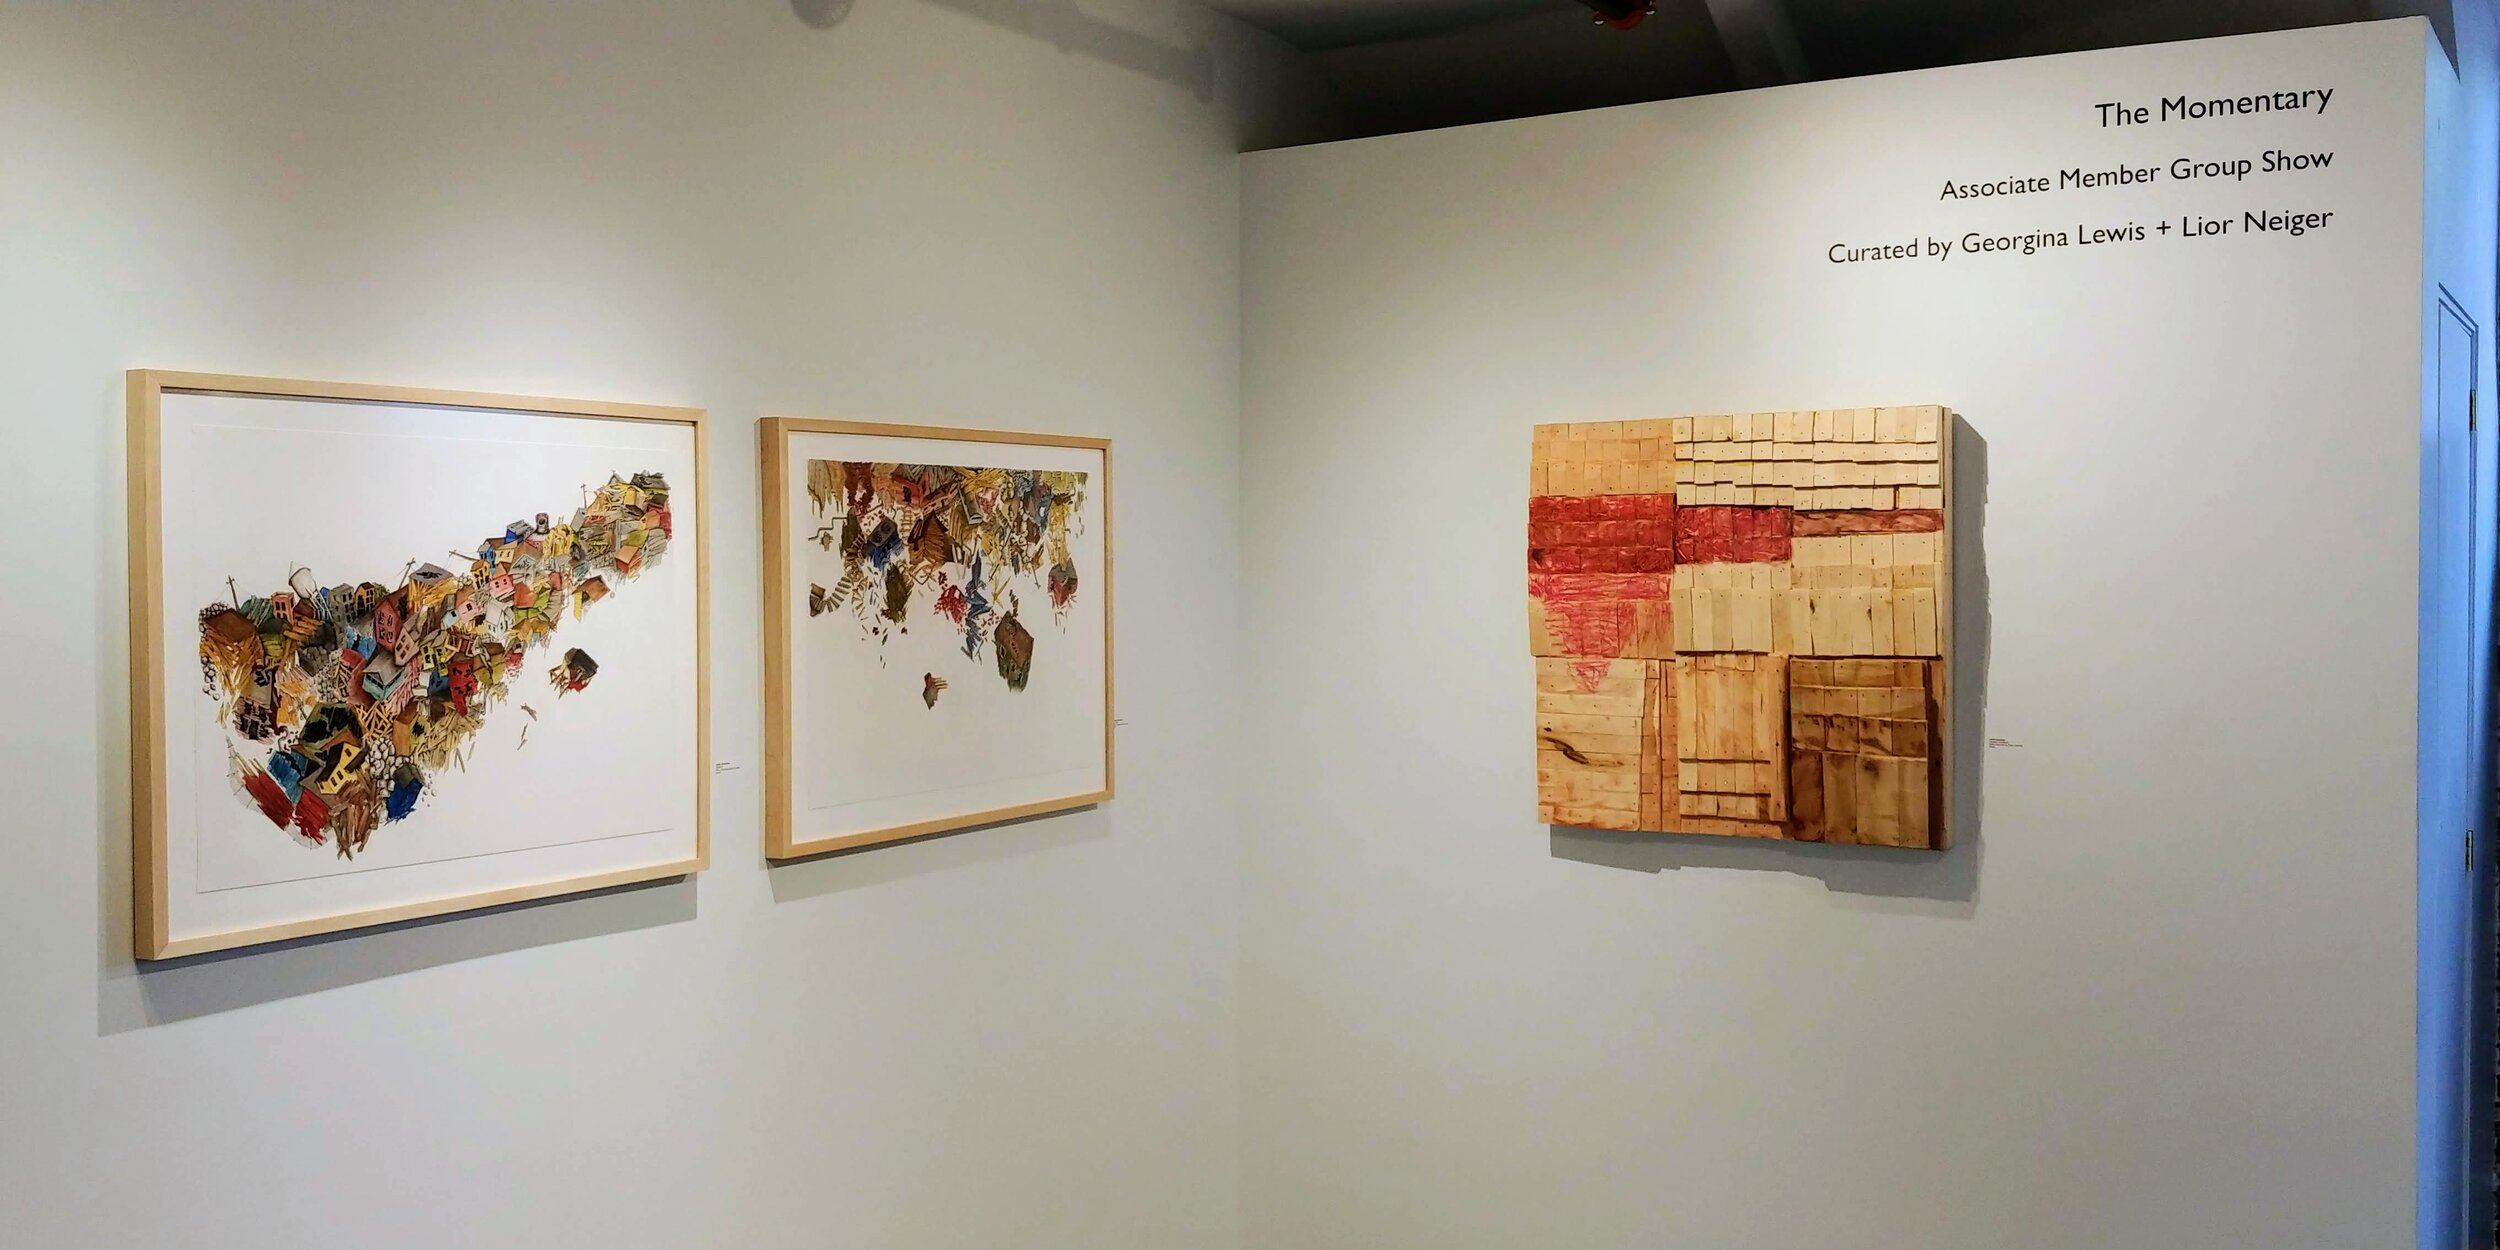  Installation view of “The Momentary”   Left: Emmerson  Right: Zelamsky 